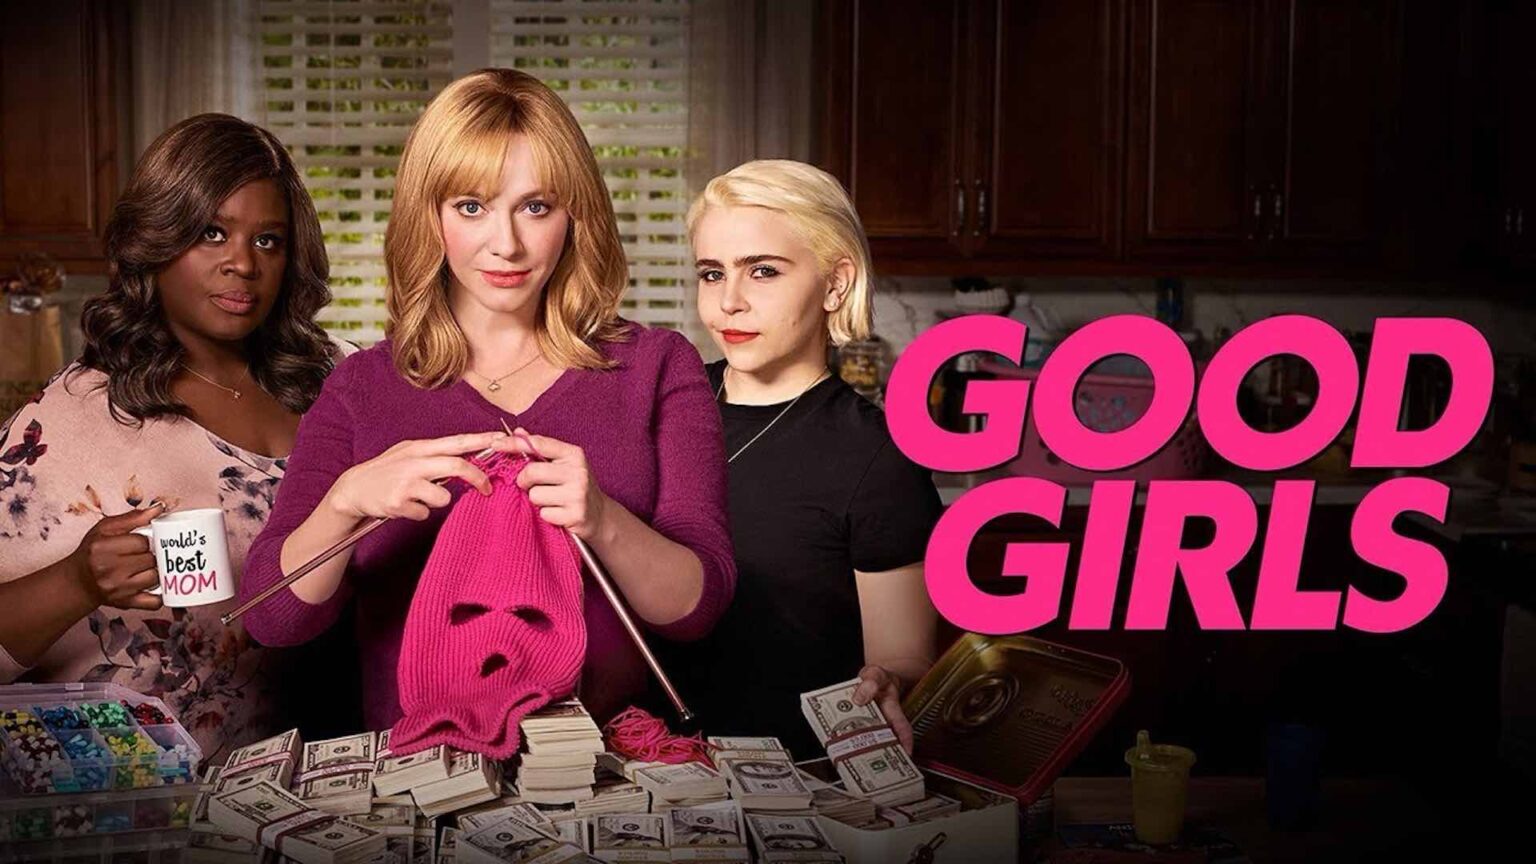 'Good Girls' is the kind of show that always leaves you wanting more. Here are all the fascinating theories surrounding season 4.